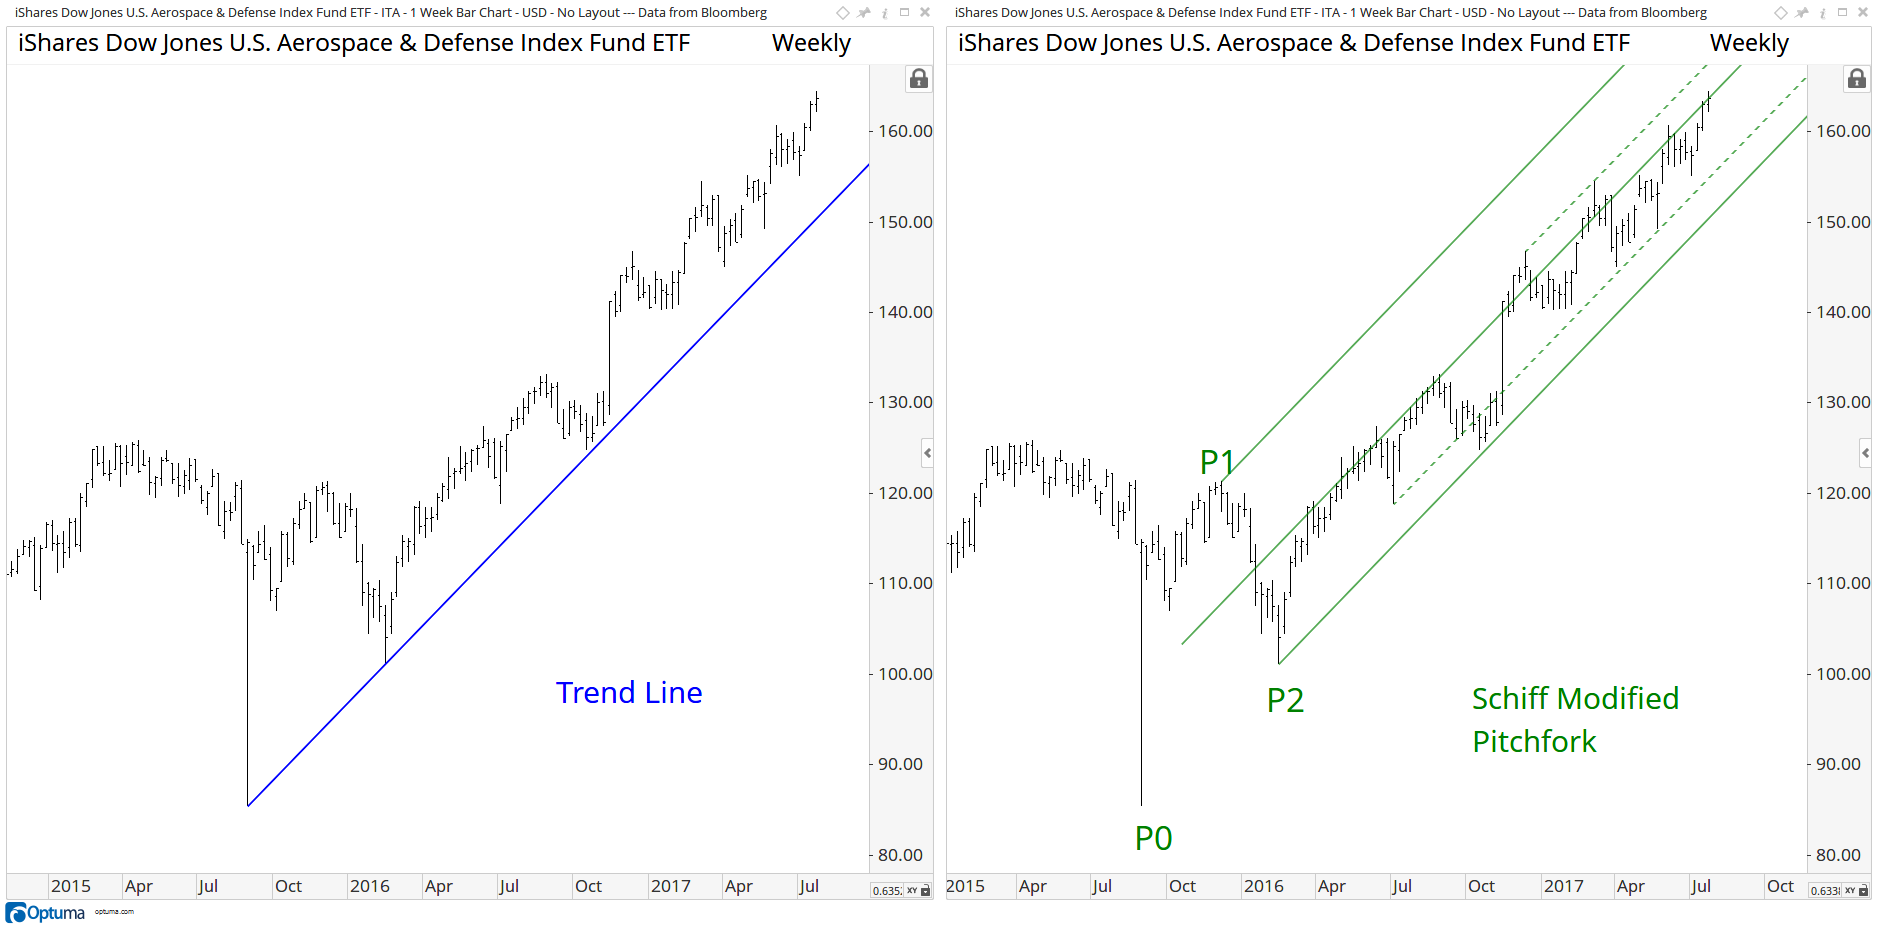 Comparing with traditional trendline